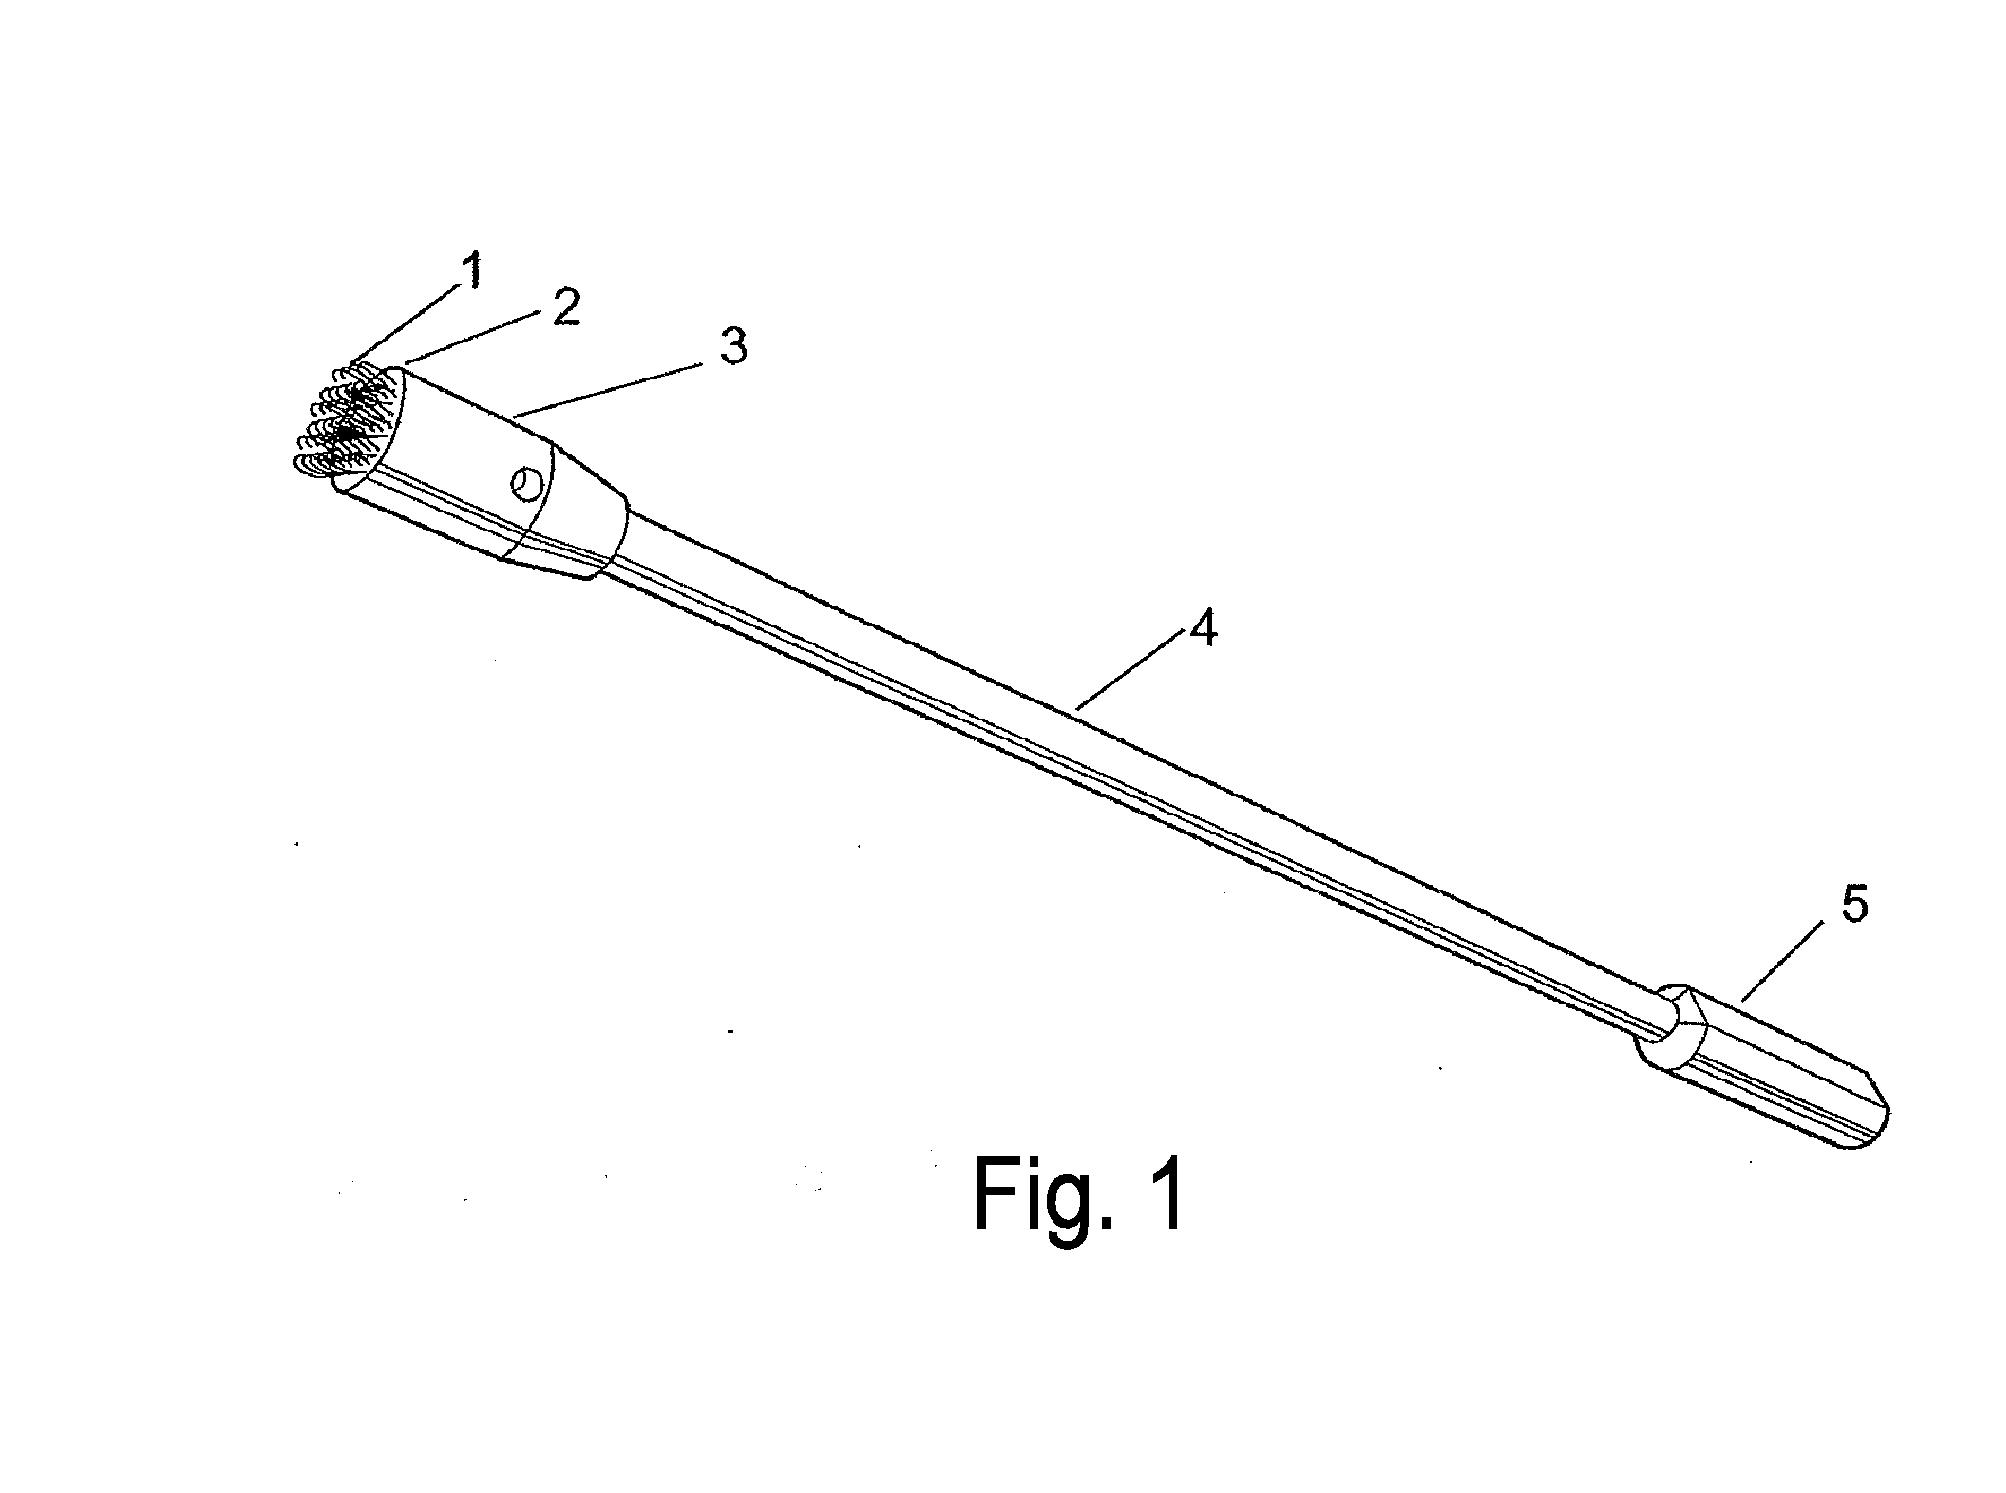 Frictional trans-epithelial tissue disruption and collection apparatus and method of inducing and/or augmenting an immune response